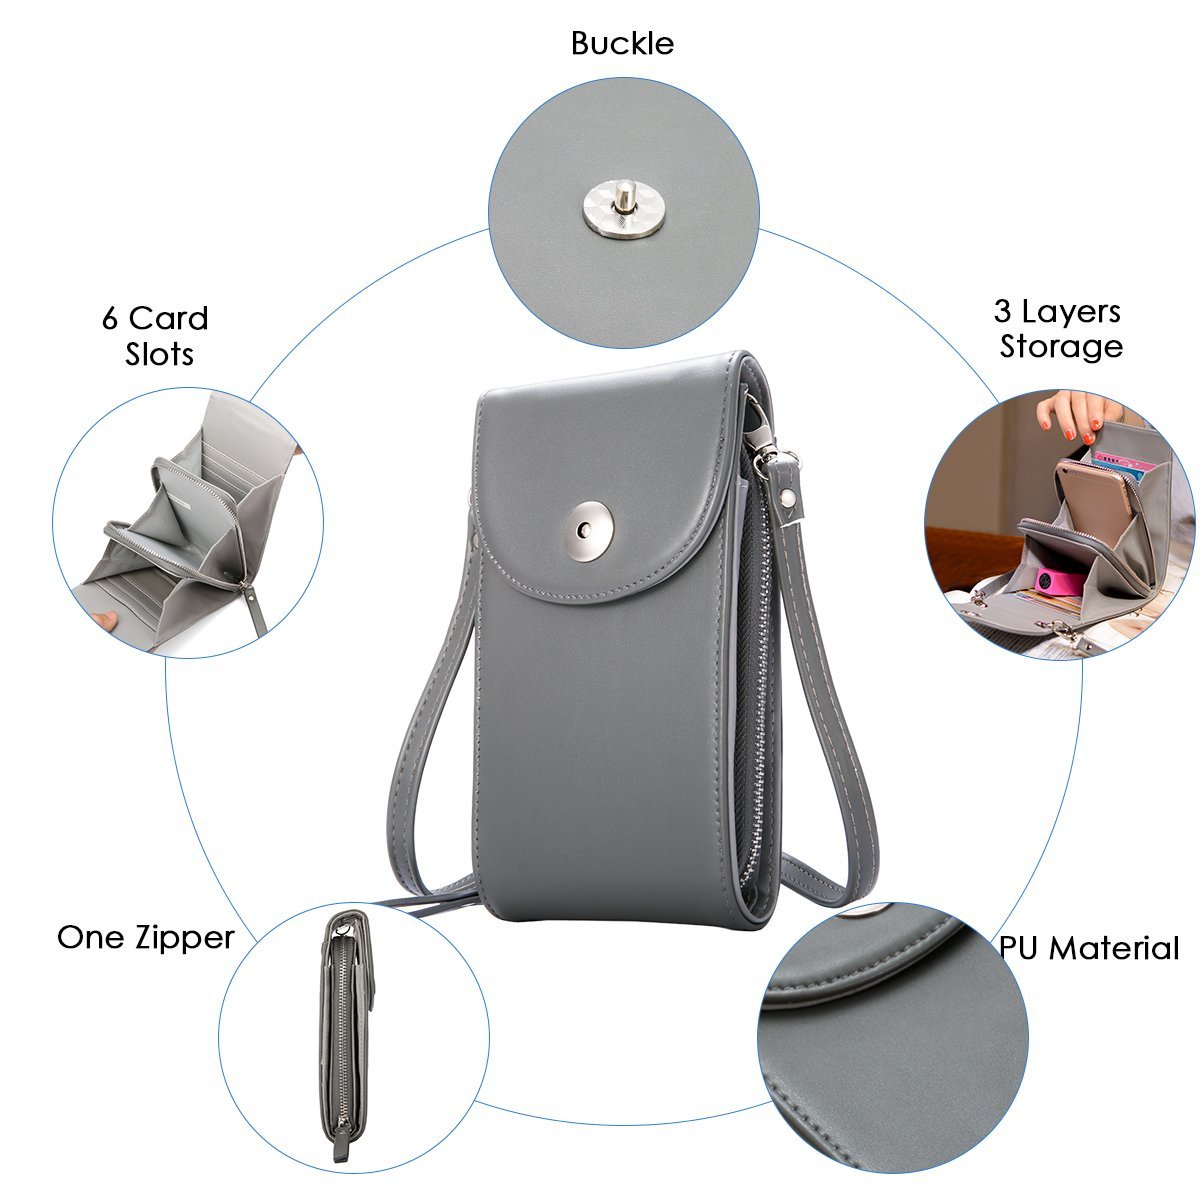 Multifunctional-Three-layer-Waist-Bag-Phone-Bag-For-47-55-Inch-Smart-Phone-for-iPhone-X-Xiaomi-Non-o-1633377-5